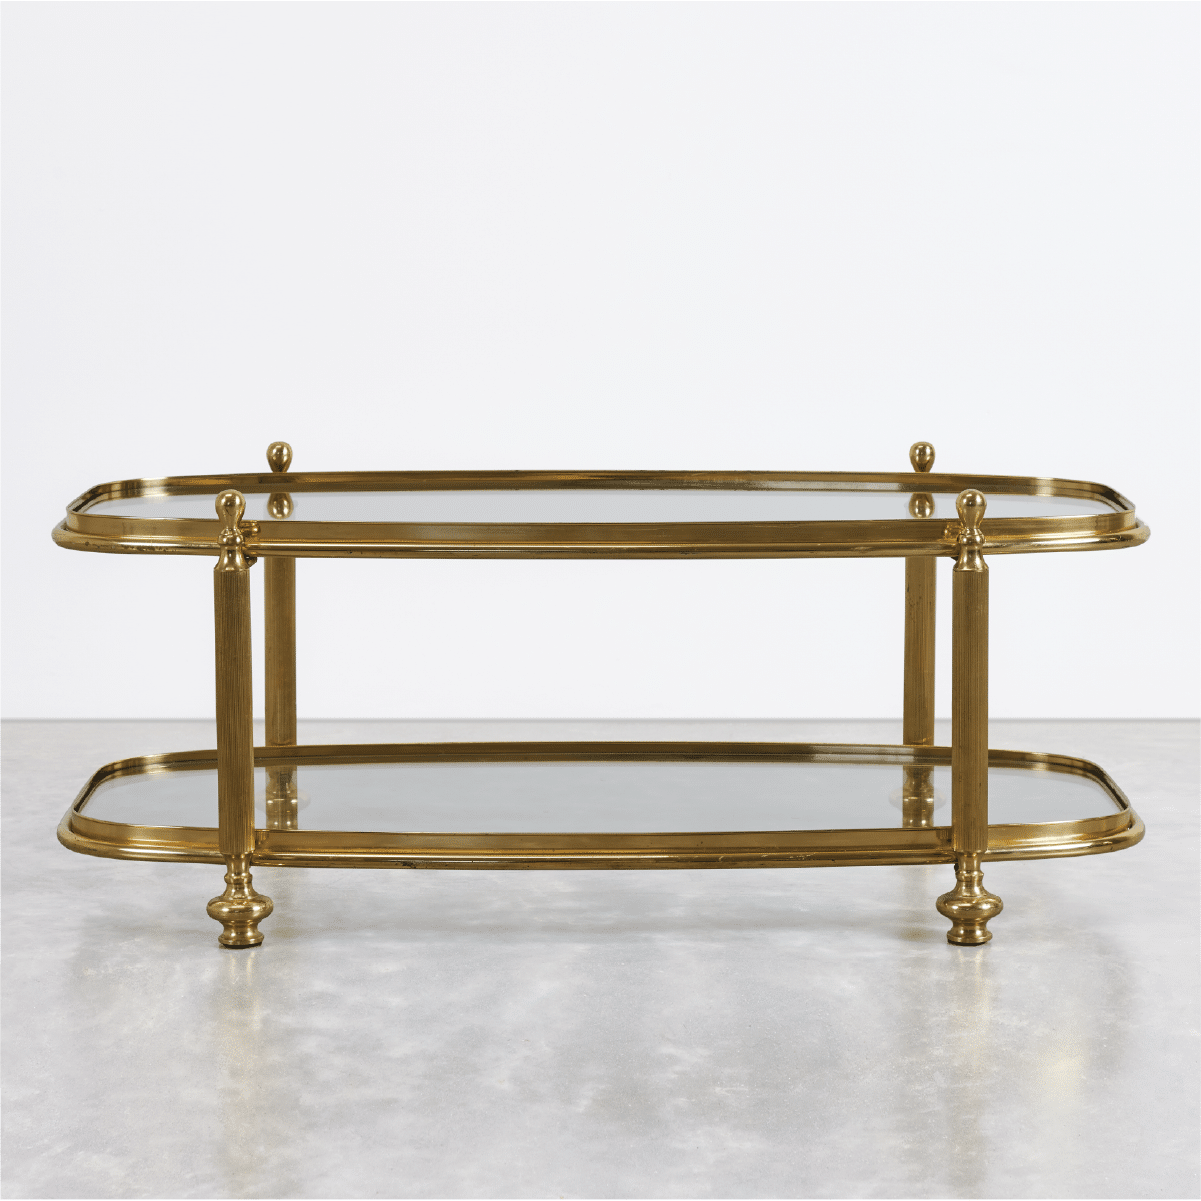 Low res for web_Antique Brass Cocktail Table_CoupXX